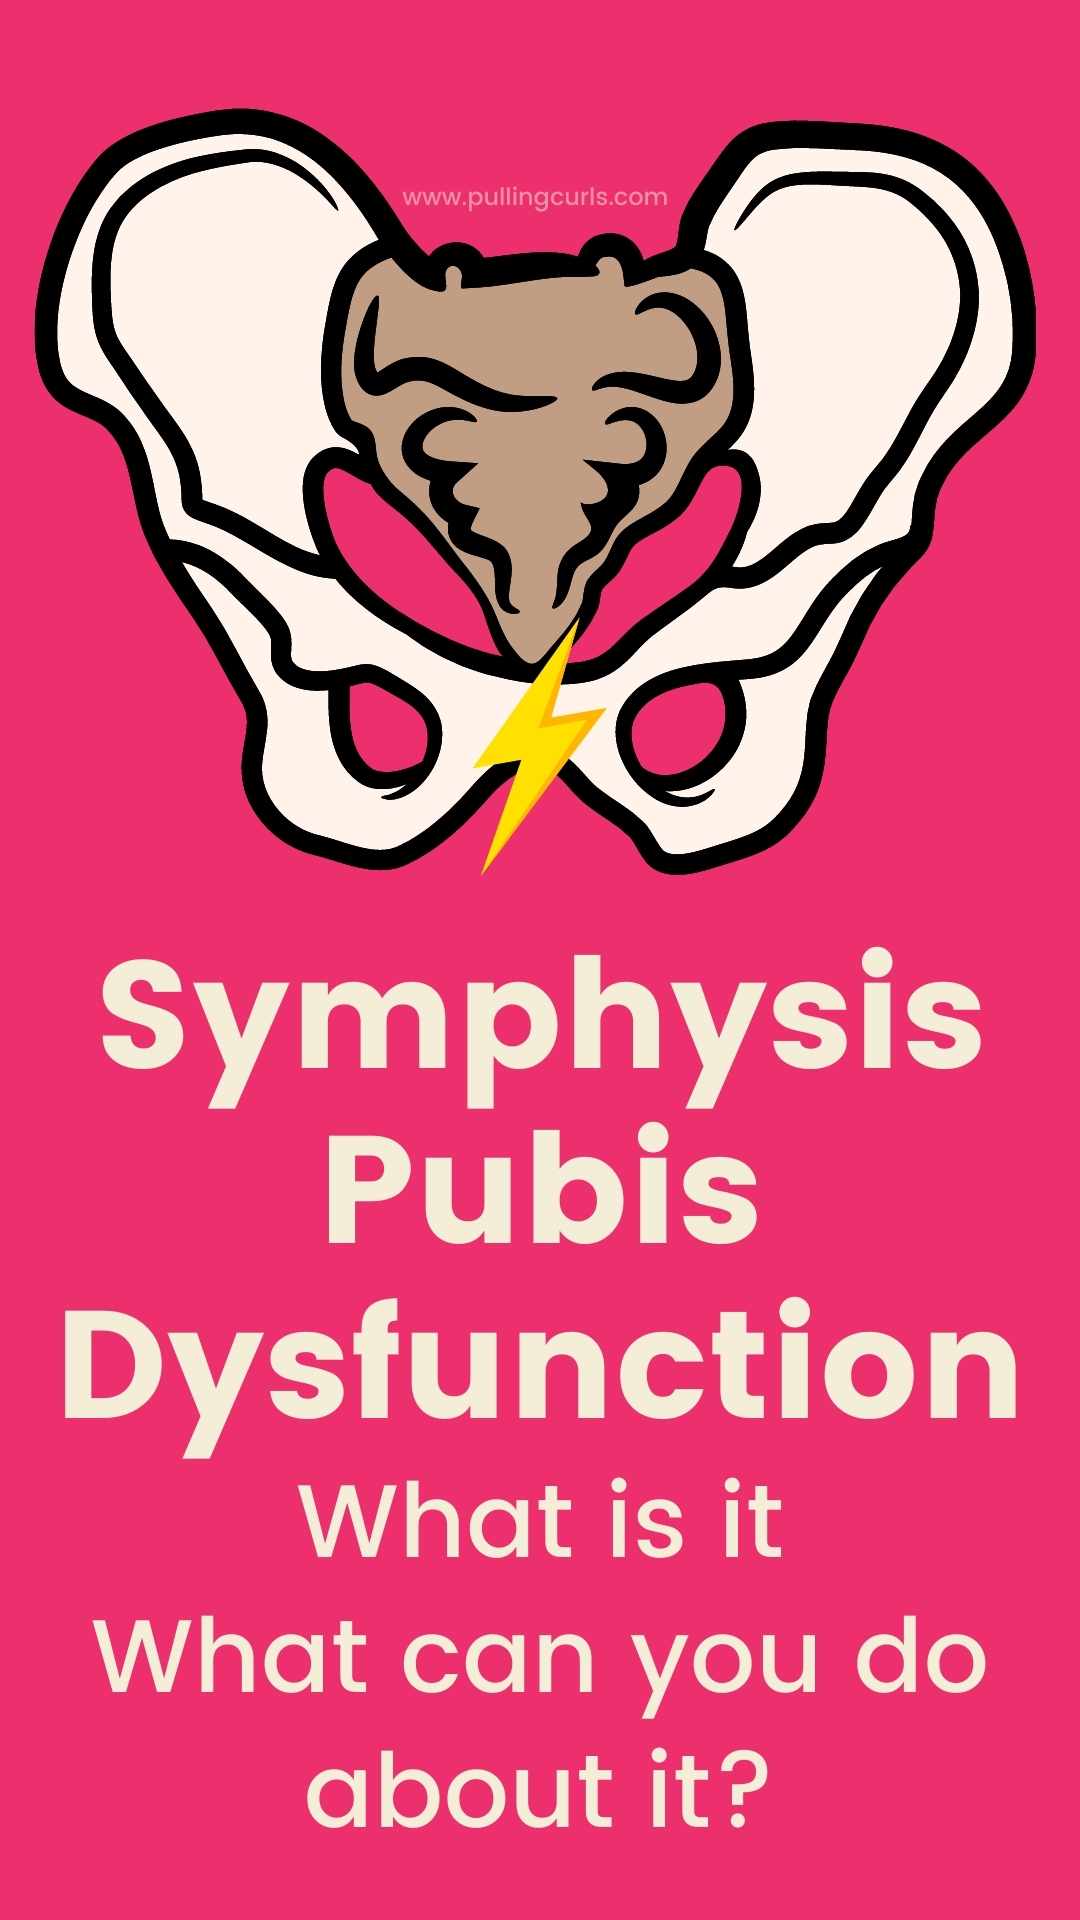 Symphysis Pubis Dysfunction can cause SO many problems for pregnant women and anyone who's ever had a baby). Today we're learing what it is and what we can do help it! via @pullingcurls